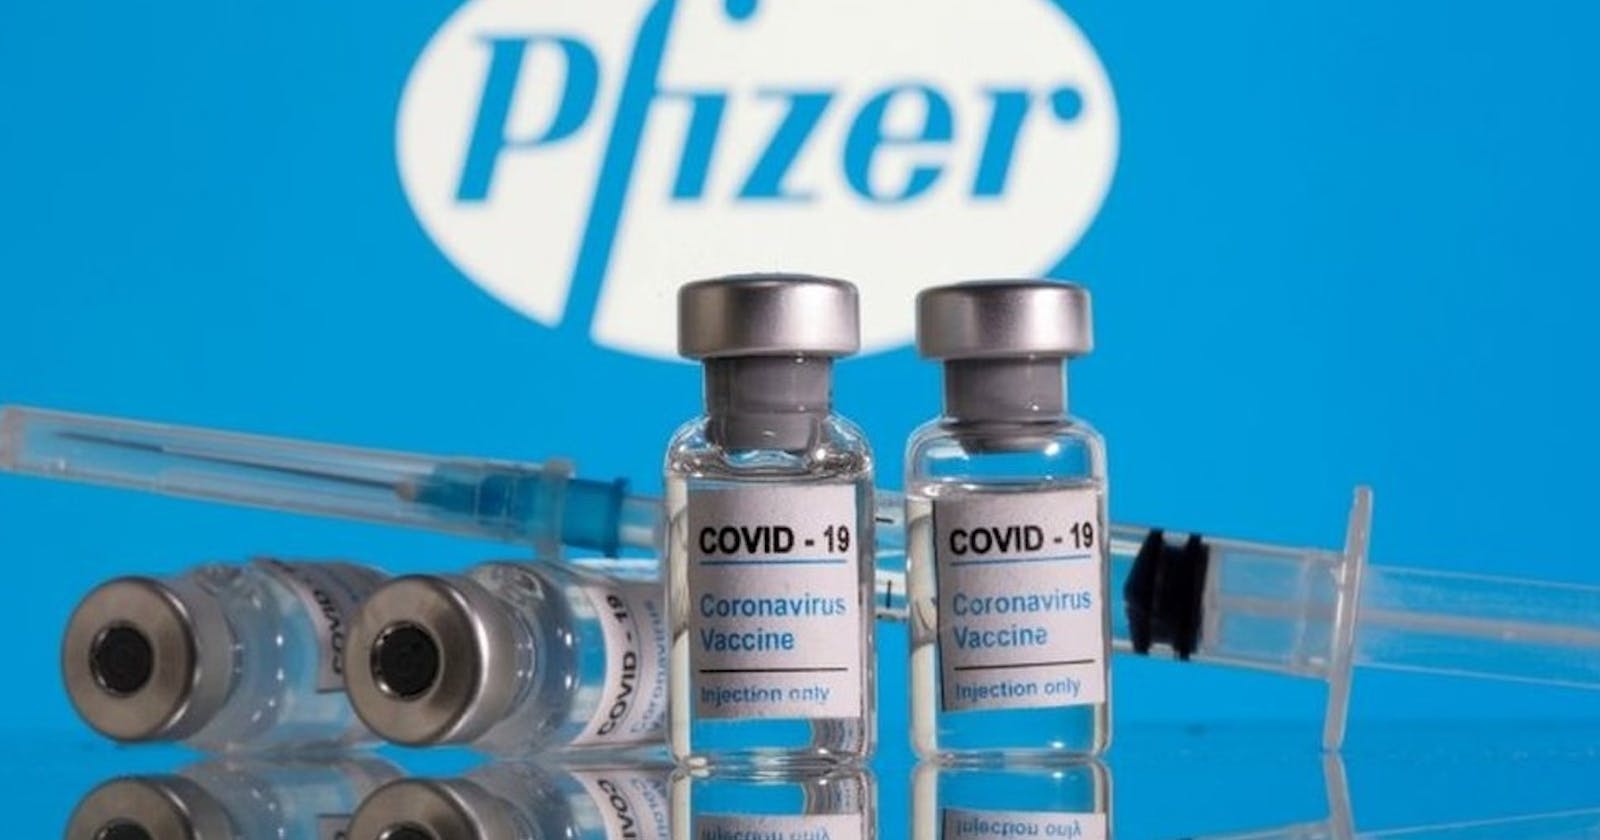 Manufacturing Expansion to Europe, Pfizer Invests US$ 2.5 Billion